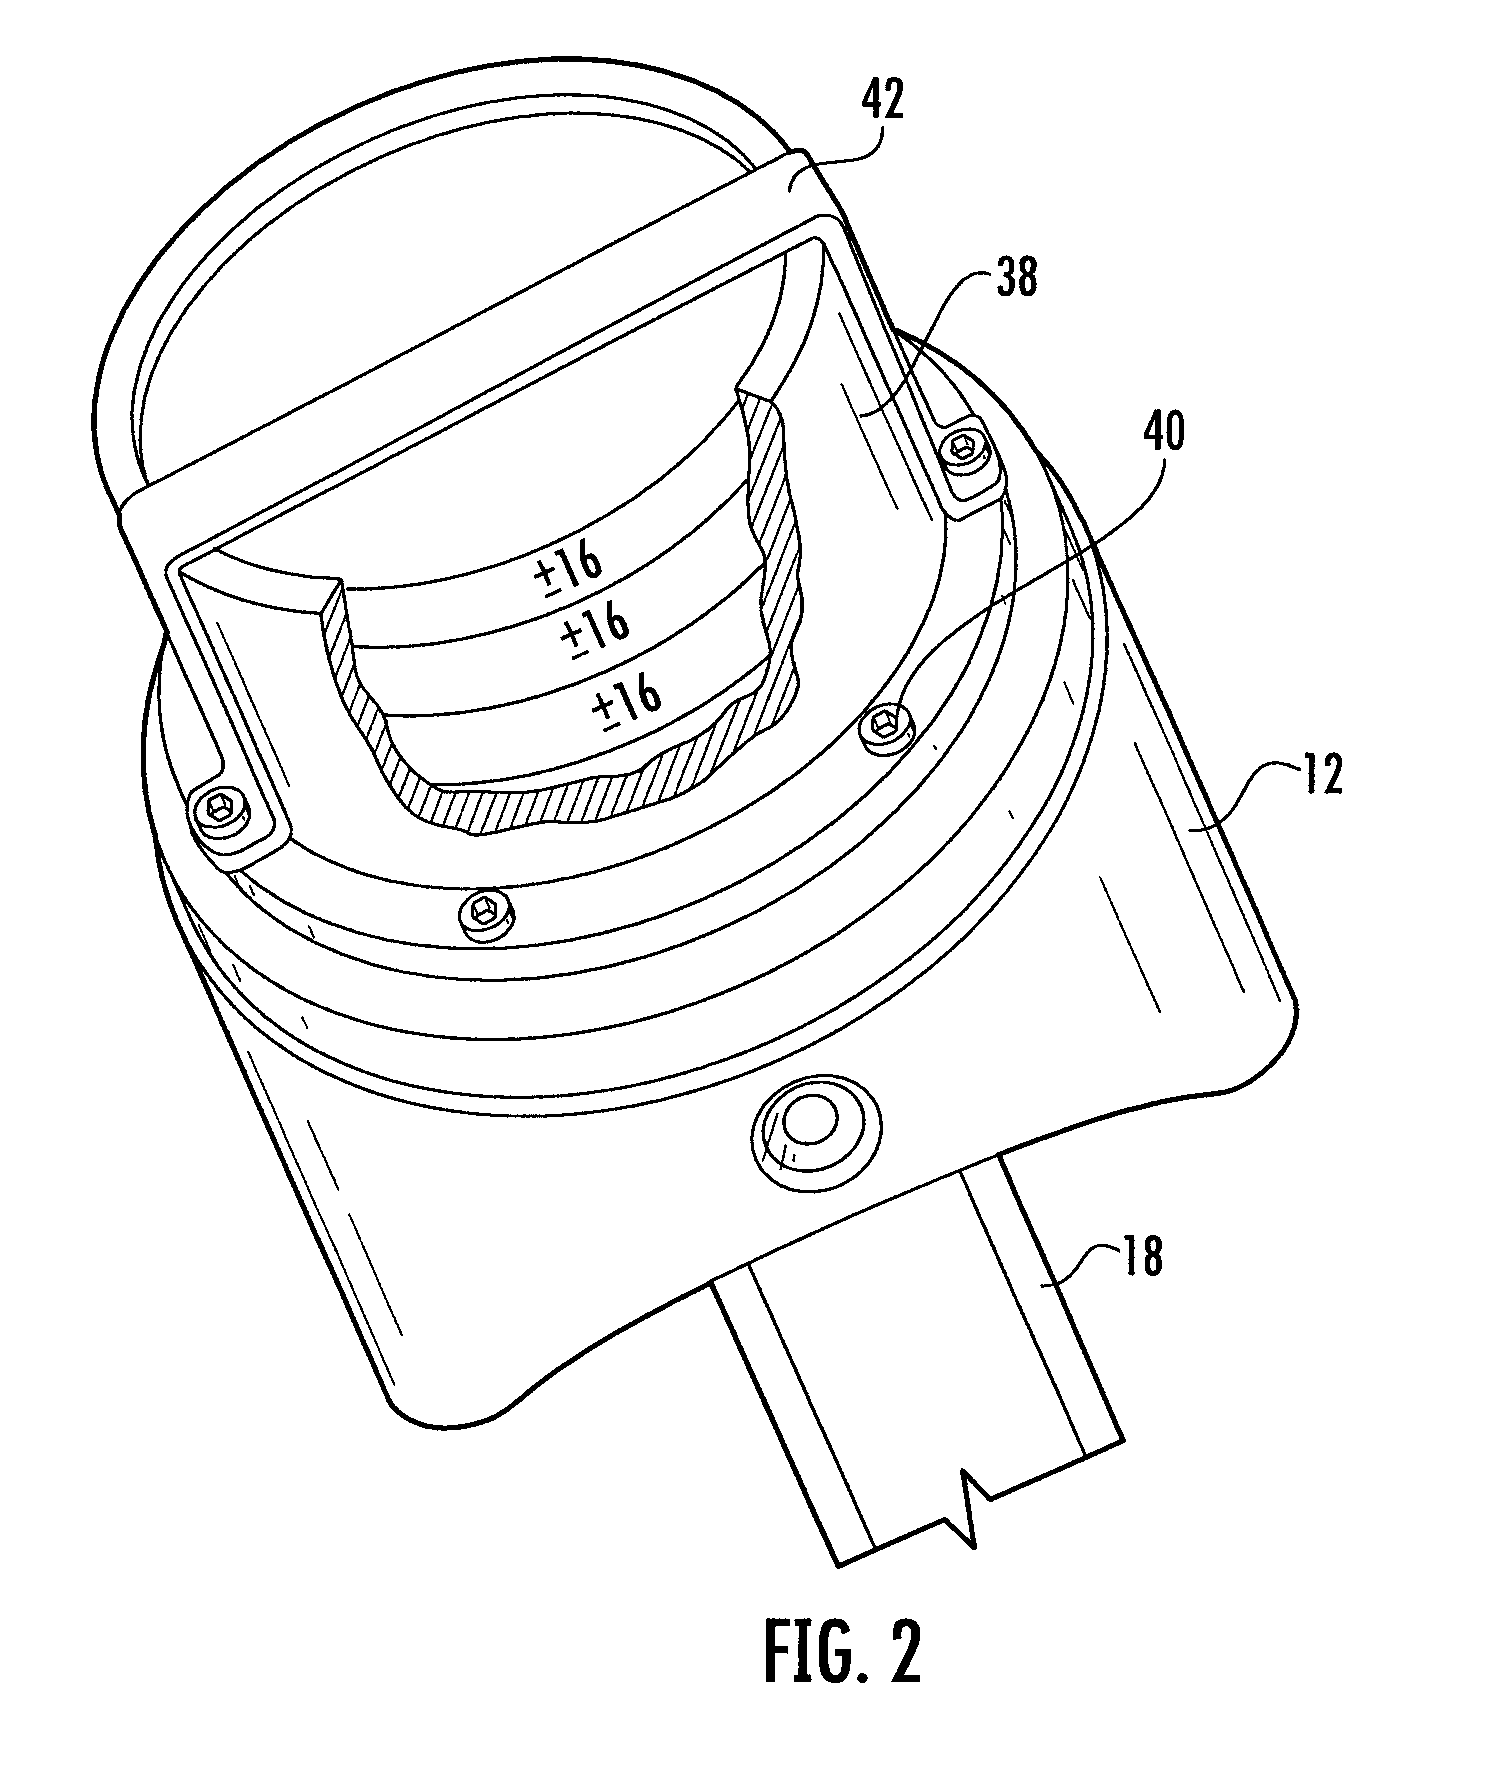 Magnetically powered reciprocating engine and electromagnet control system